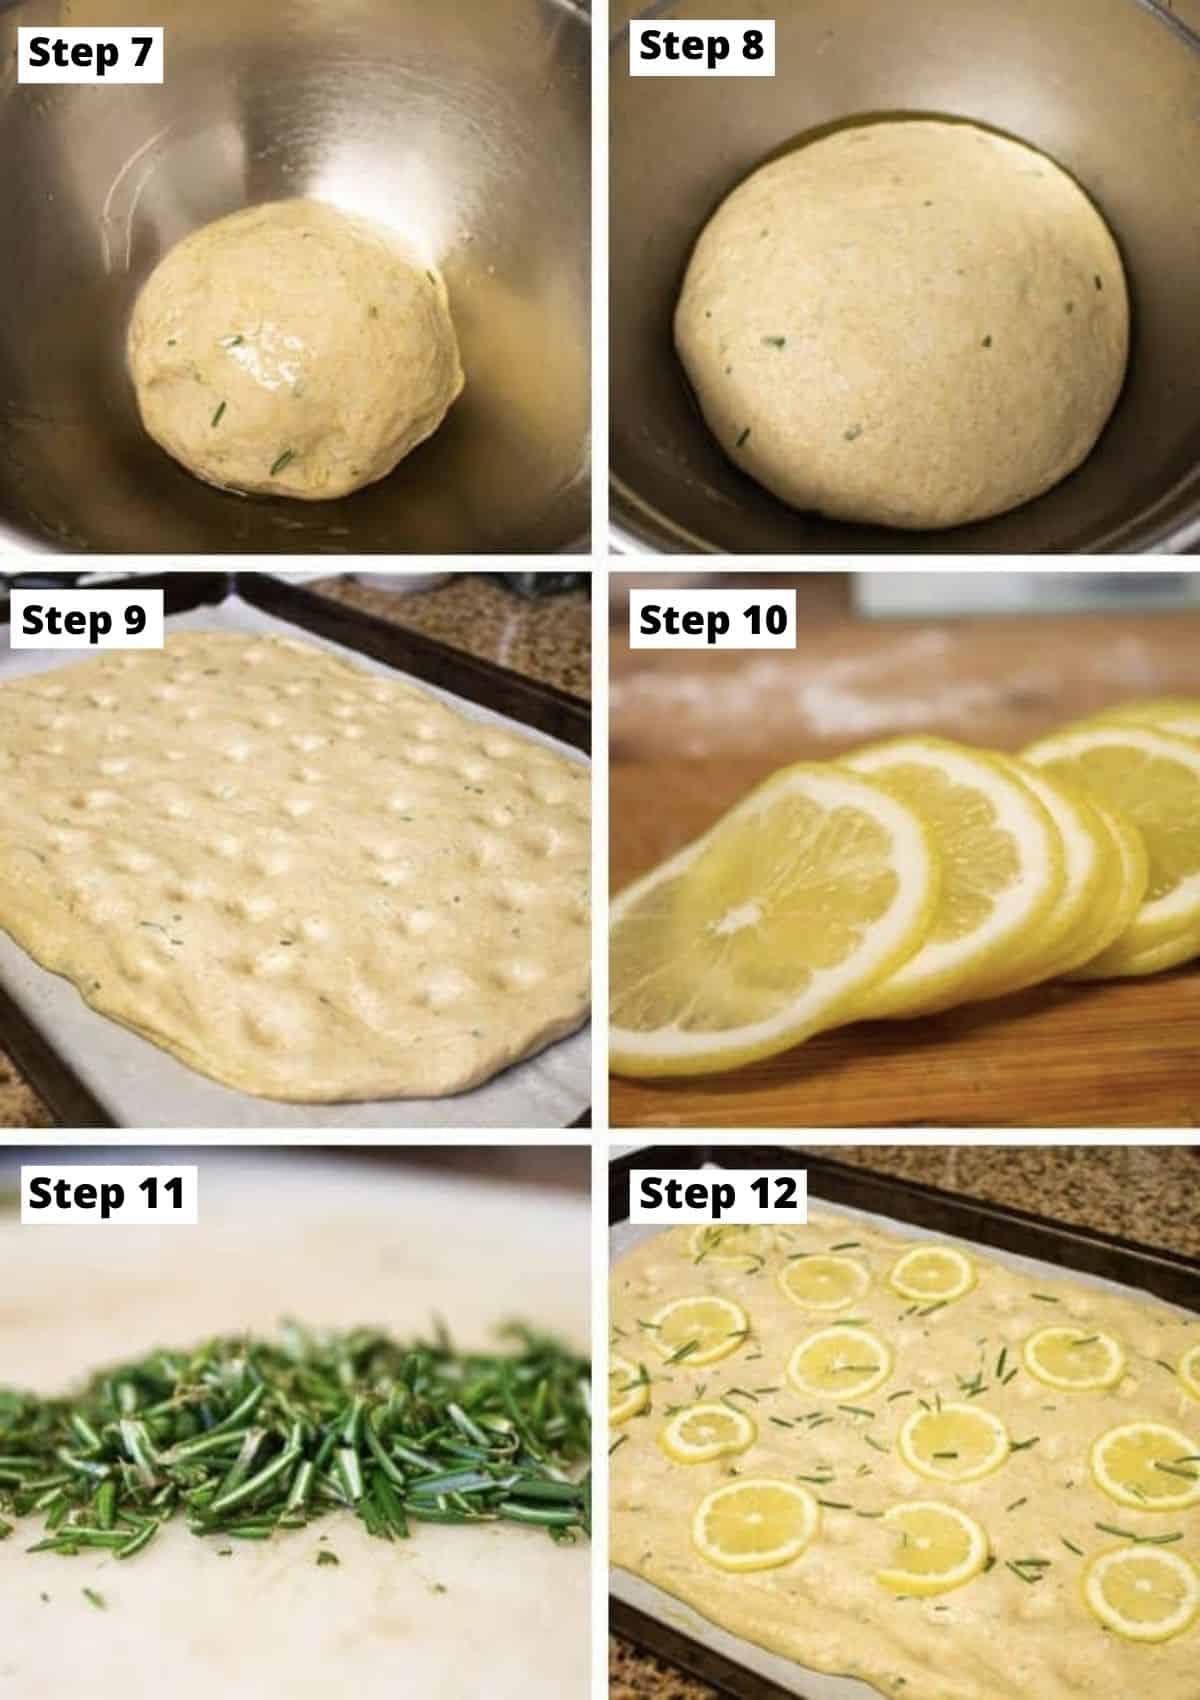 Process images for preparing focaccia bread: oiling ball of dough, ball of dough rising, dough stretched out on baking sheet with dimples, slicing lemons, chopping rosemary, topping dough with lemon, rosemary, and salt. 